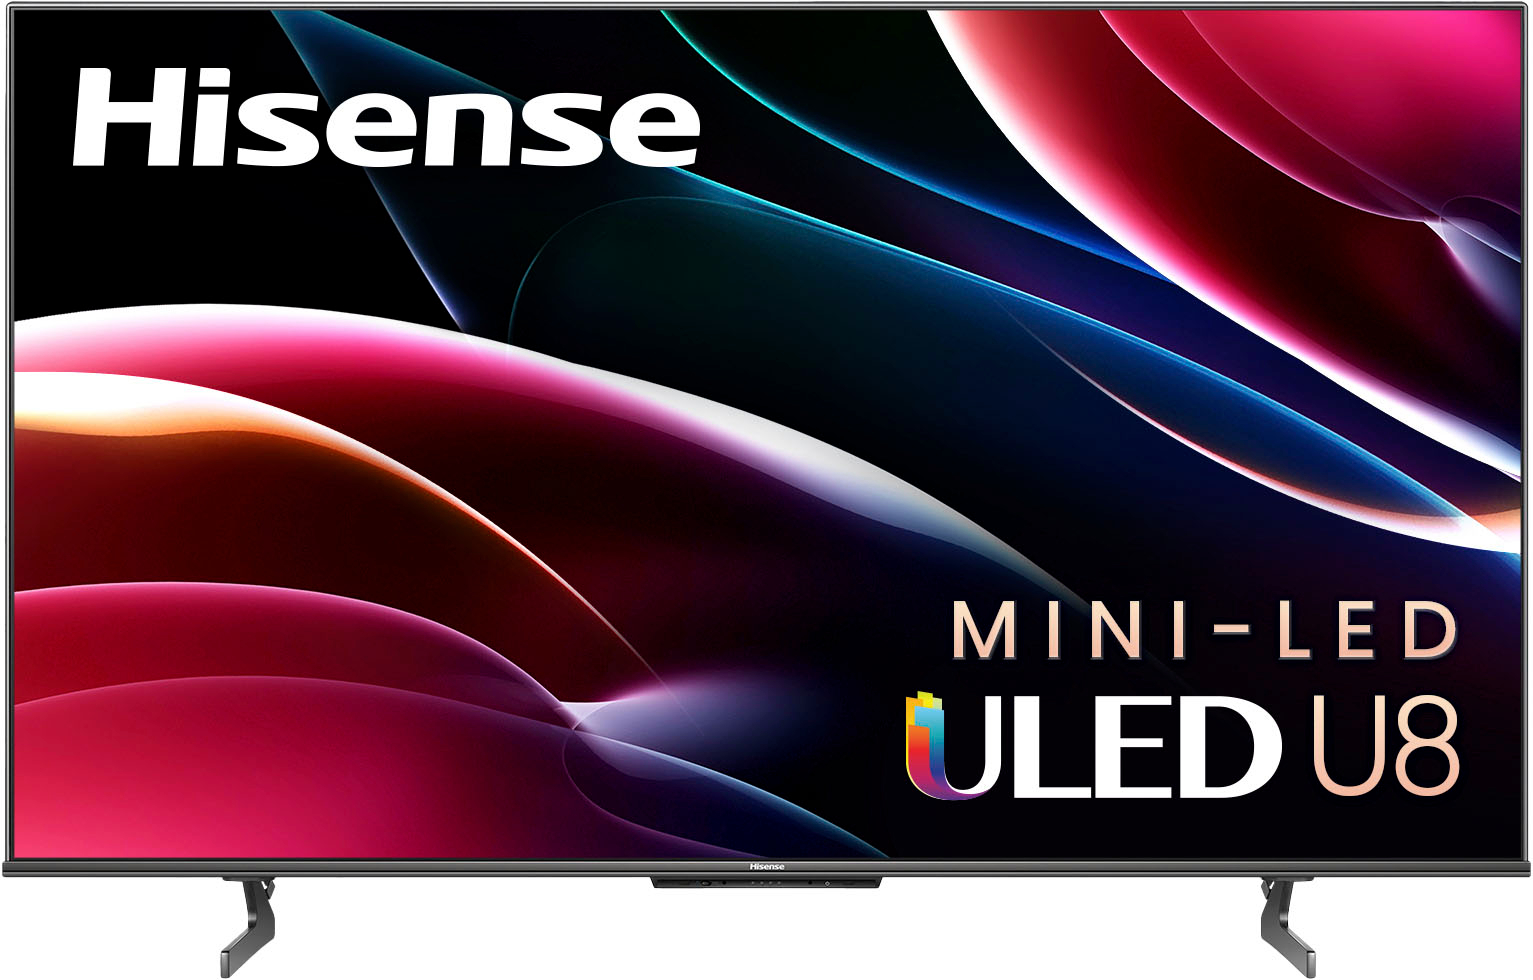 65-inch Hisense U8H Mini-LED TV with 1,500 nits gets 39% discount and drops  to fresh all-time low -  News